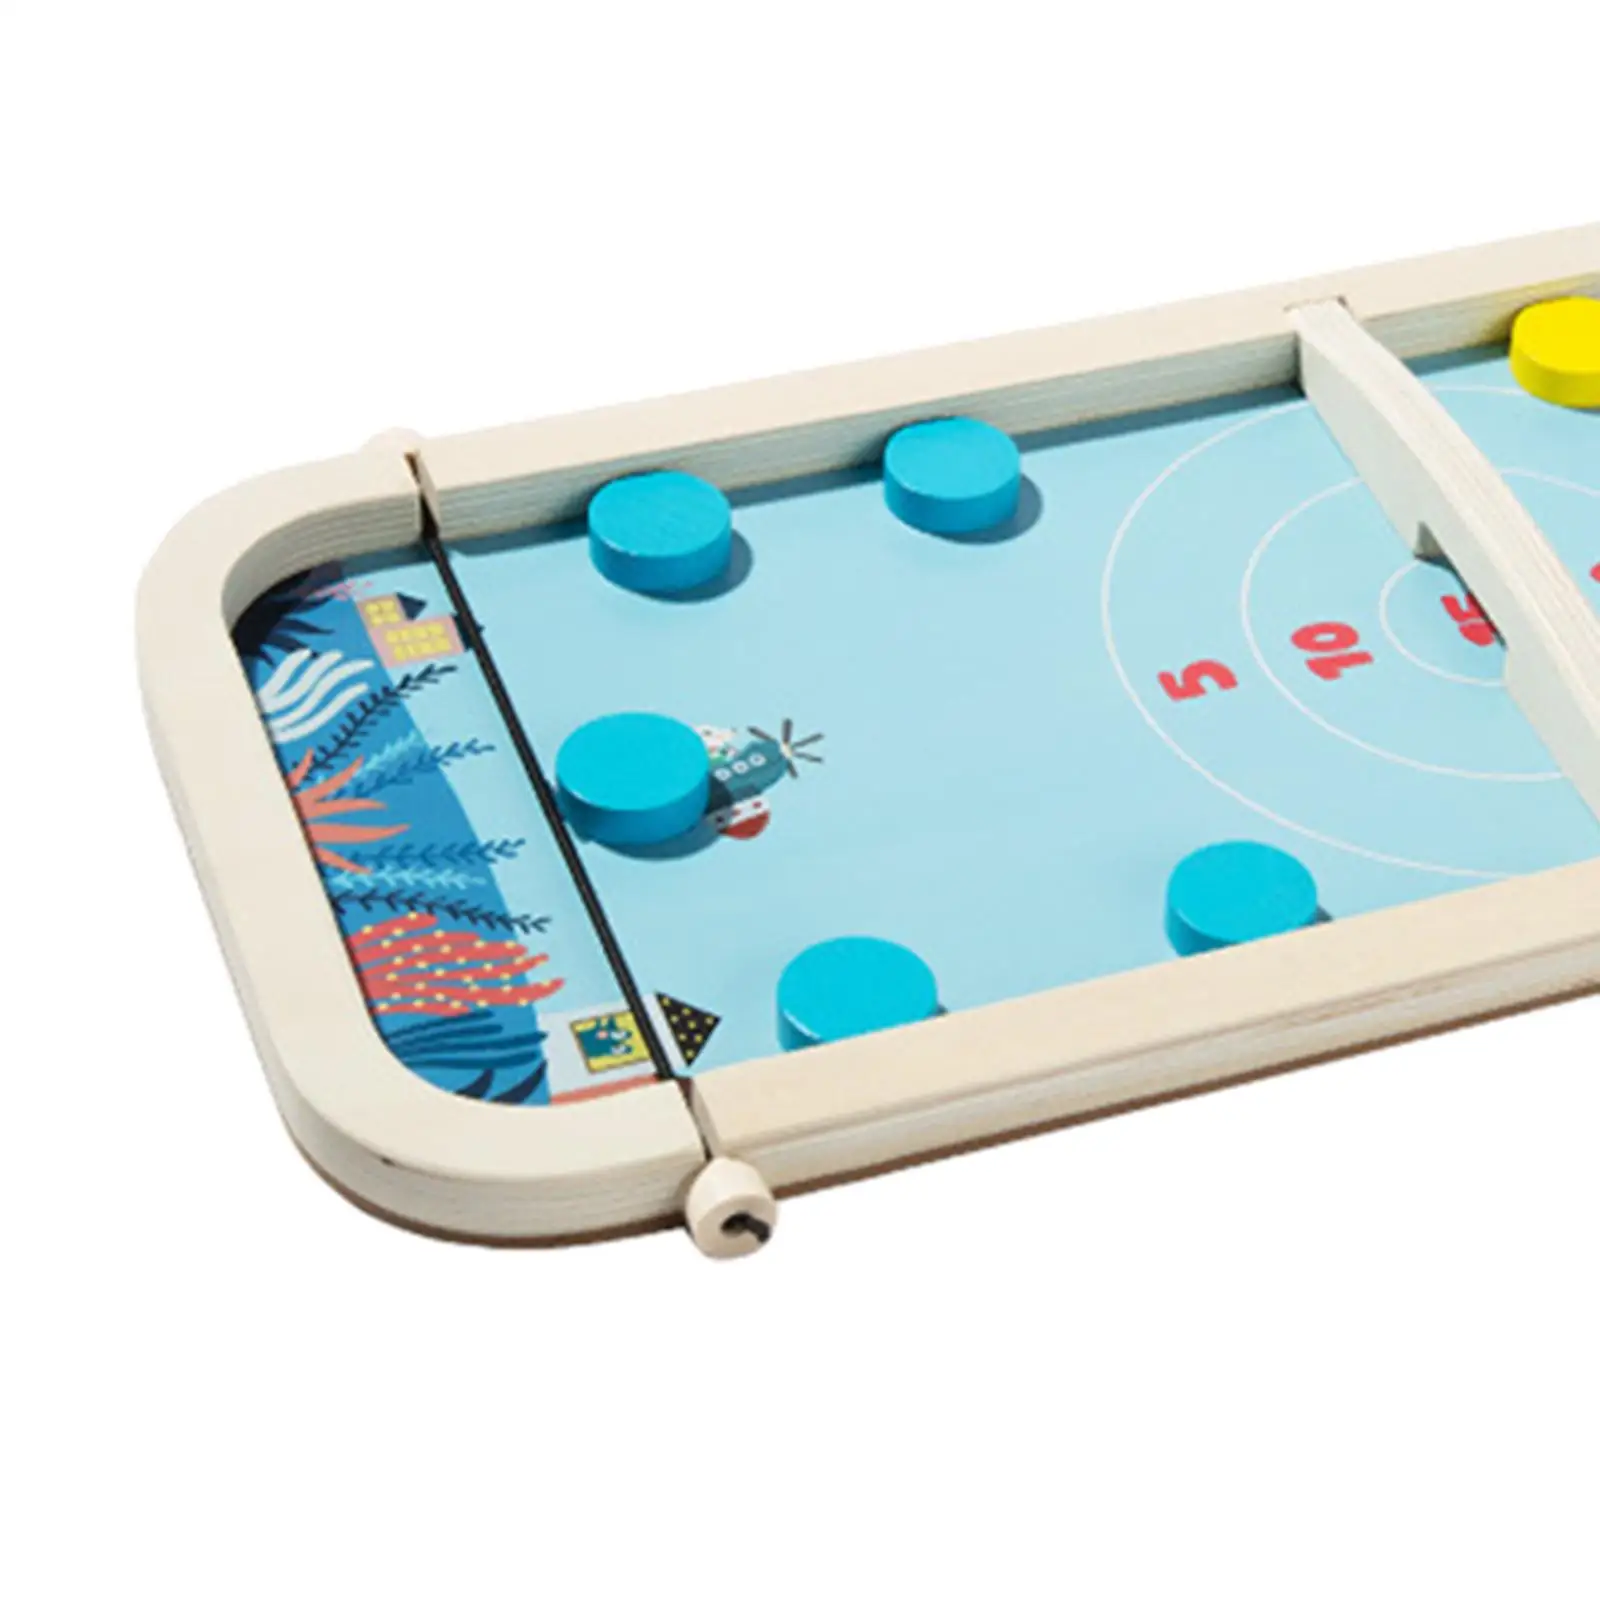 Puck Game Paced Winner Board Game Sling Puck Game Interactive Toy Board Game Table Hockey Game Hockey Game for Adults Party Kids